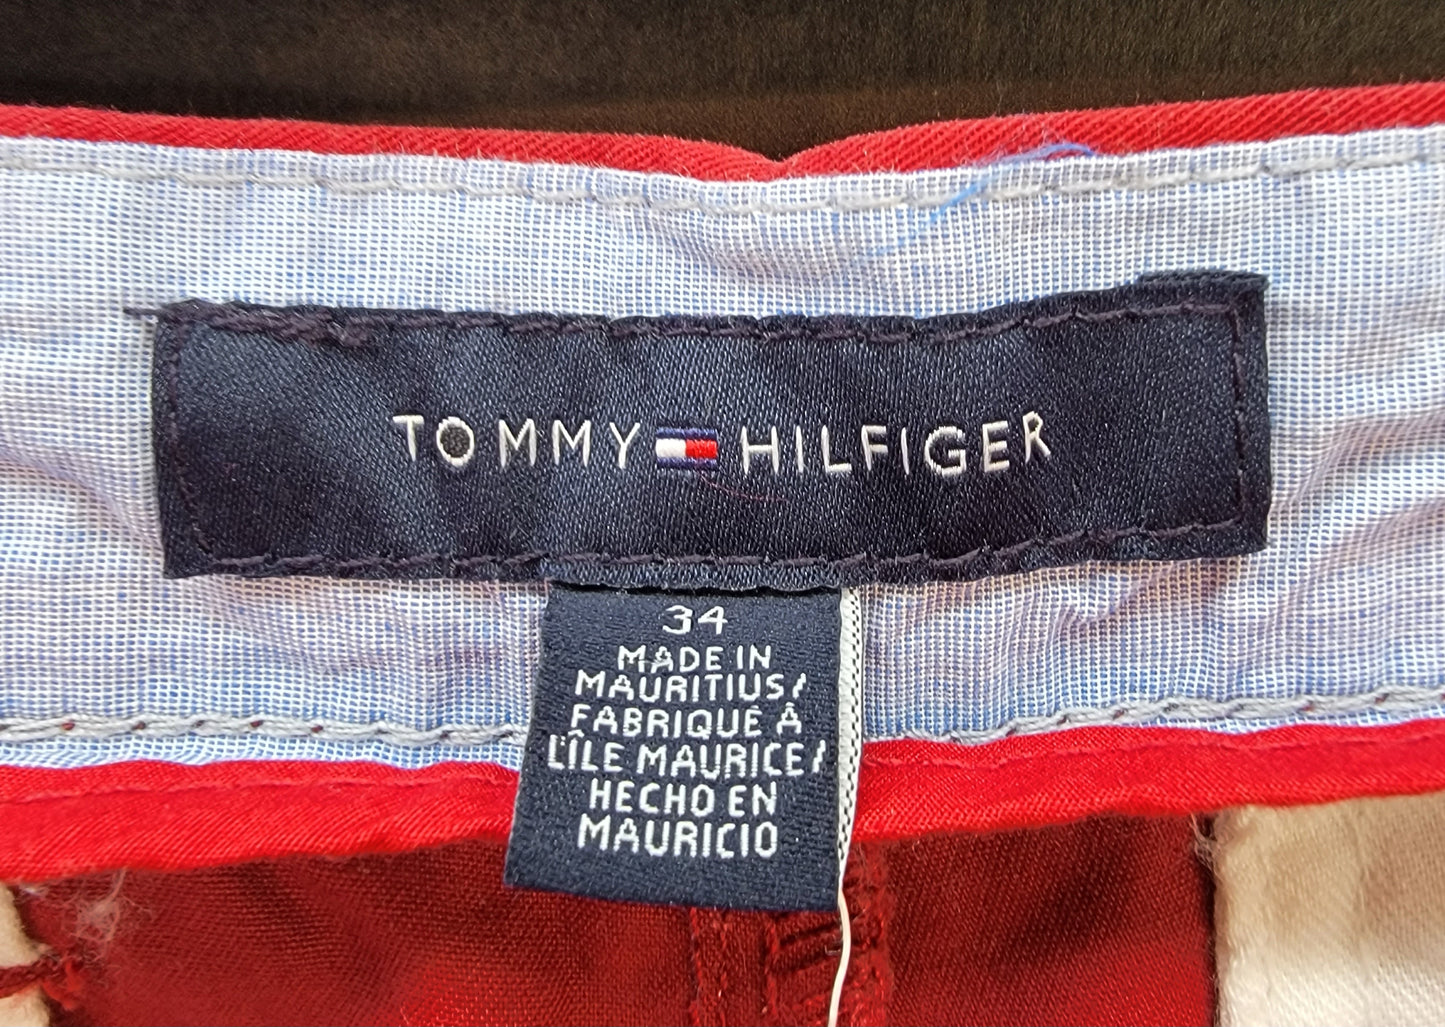 Tommy Hilfiger Men's Barn Red Shorts Size 34W Retail $39.98